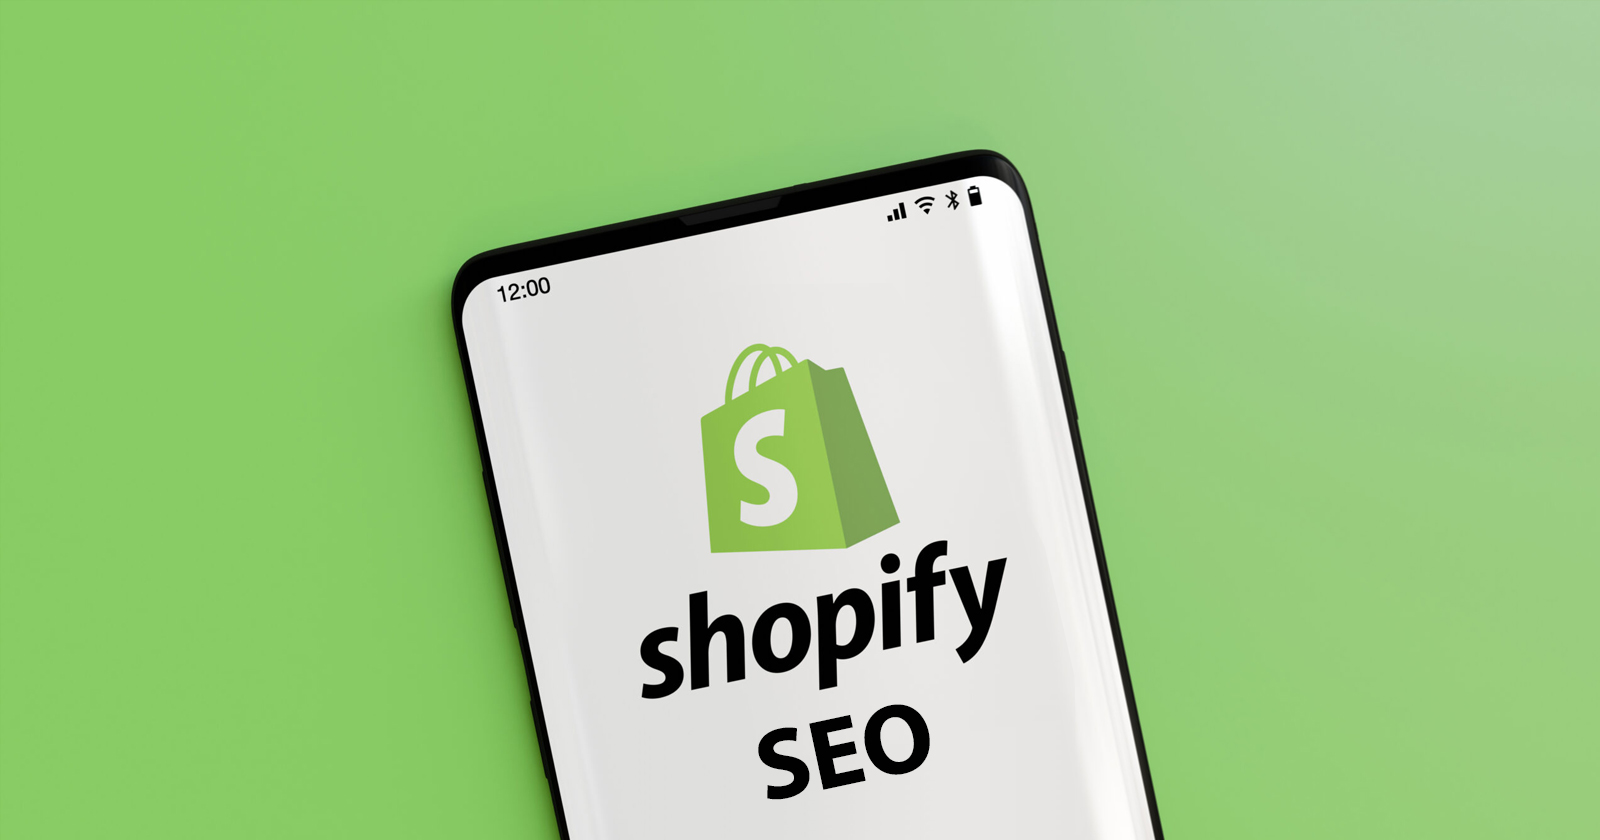 Shopify SEO - How to Optimize Your Shopify Website for Google